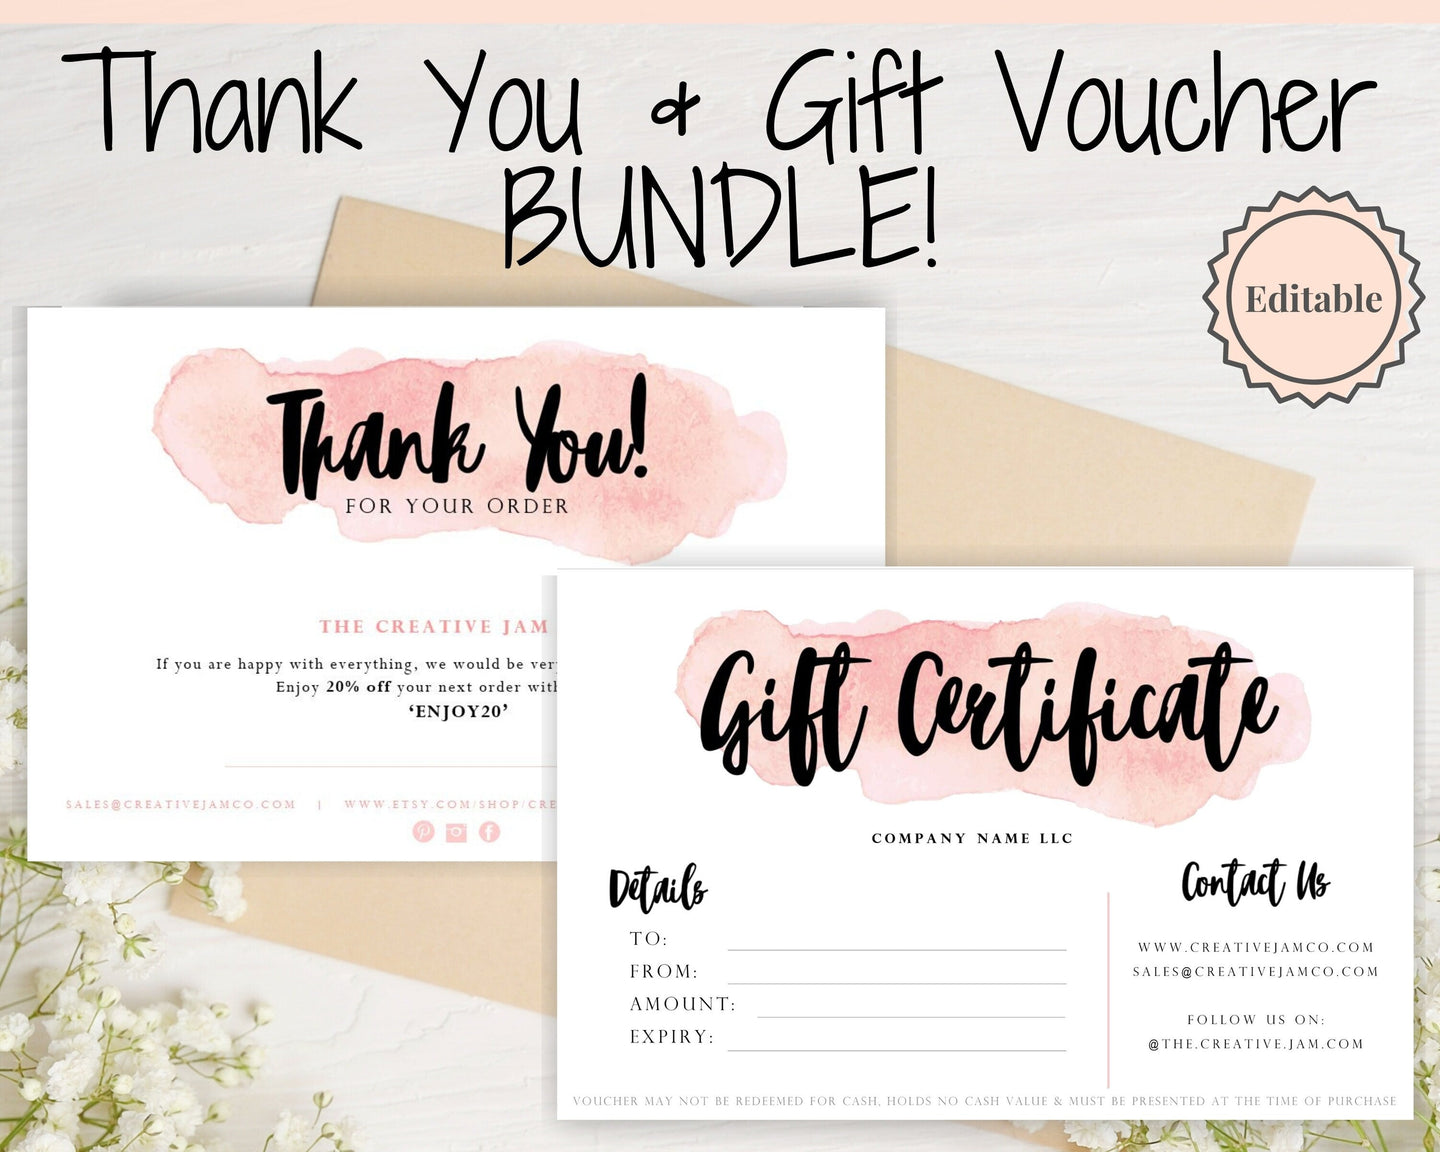 Gift Certificate Template & Thank You For Your Order Business Insert Card BUNDLE. Editable Gift Voucher Template, Thank You Cards, Pink Card | Bundle Style 1